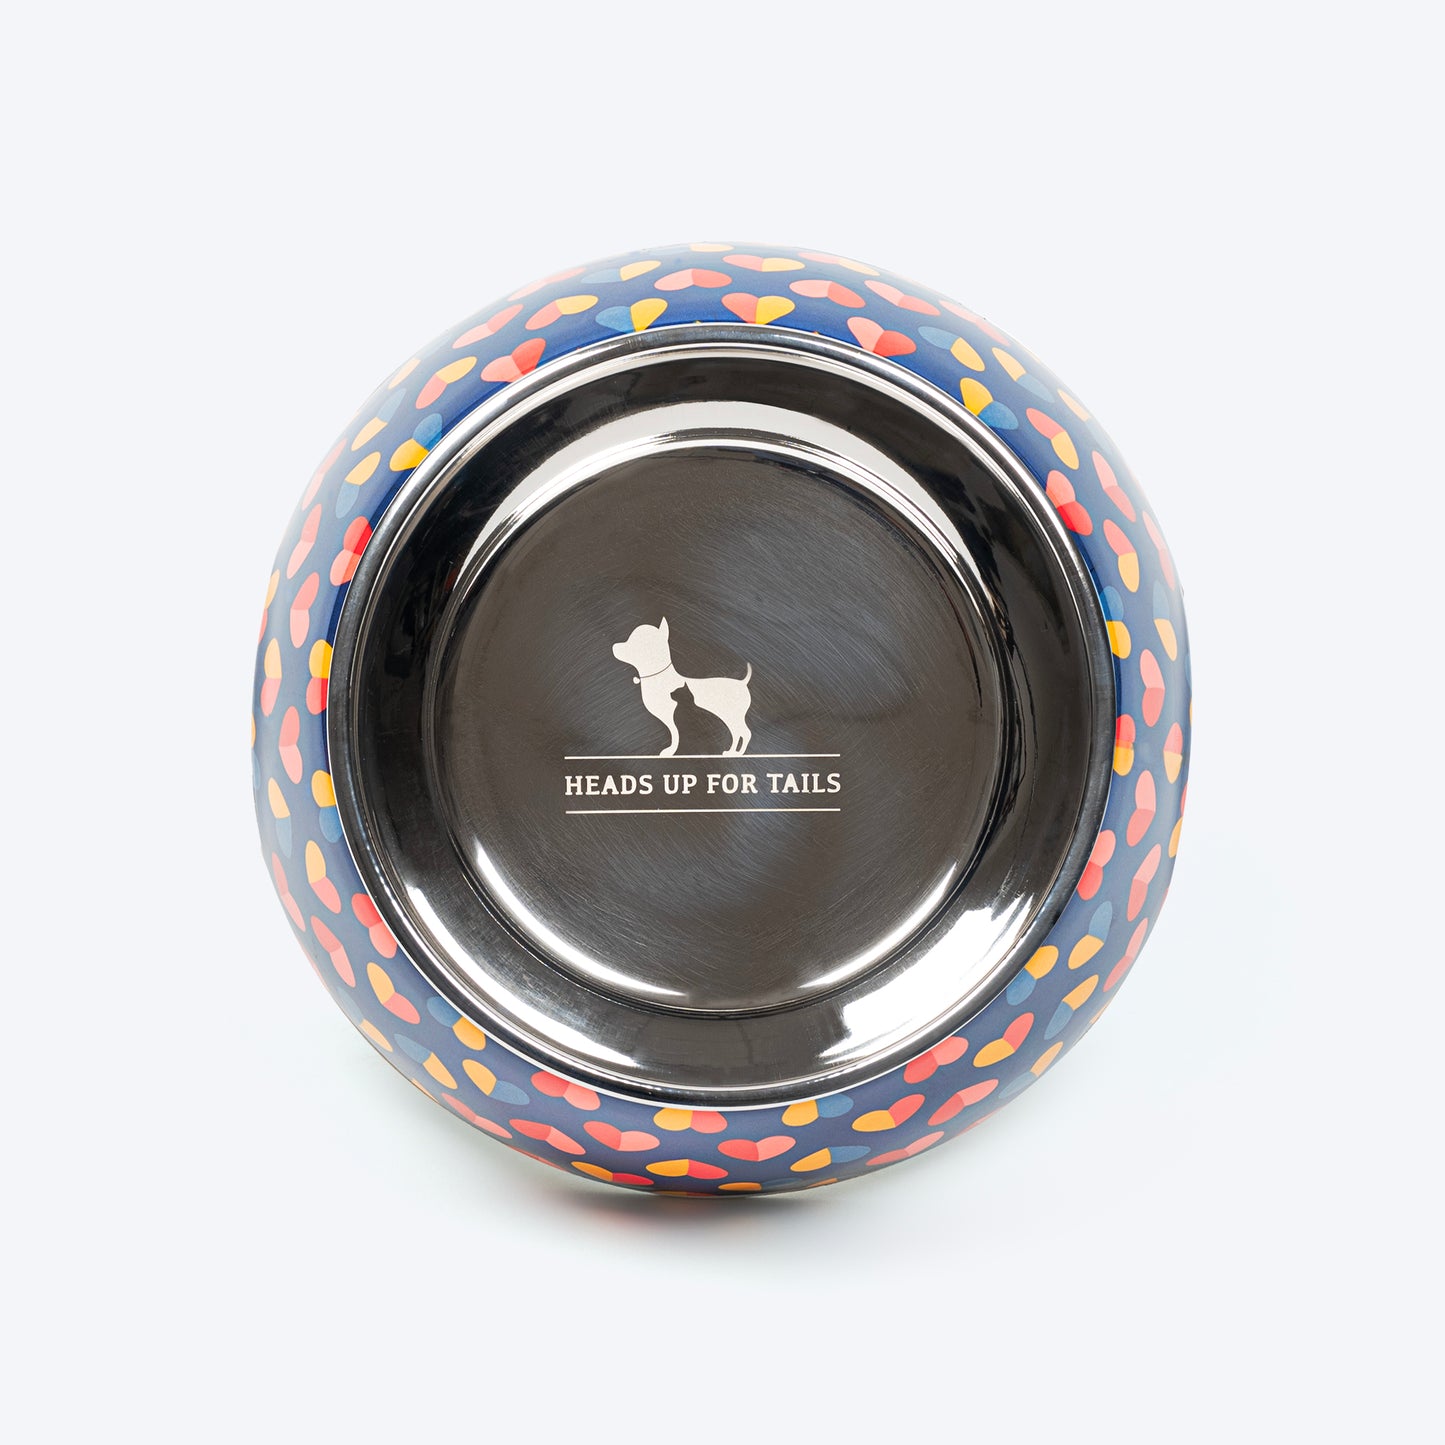 HUFT Love Struck Printed Melamine Bowl for Dogs - Navy - Heads Up For Tails